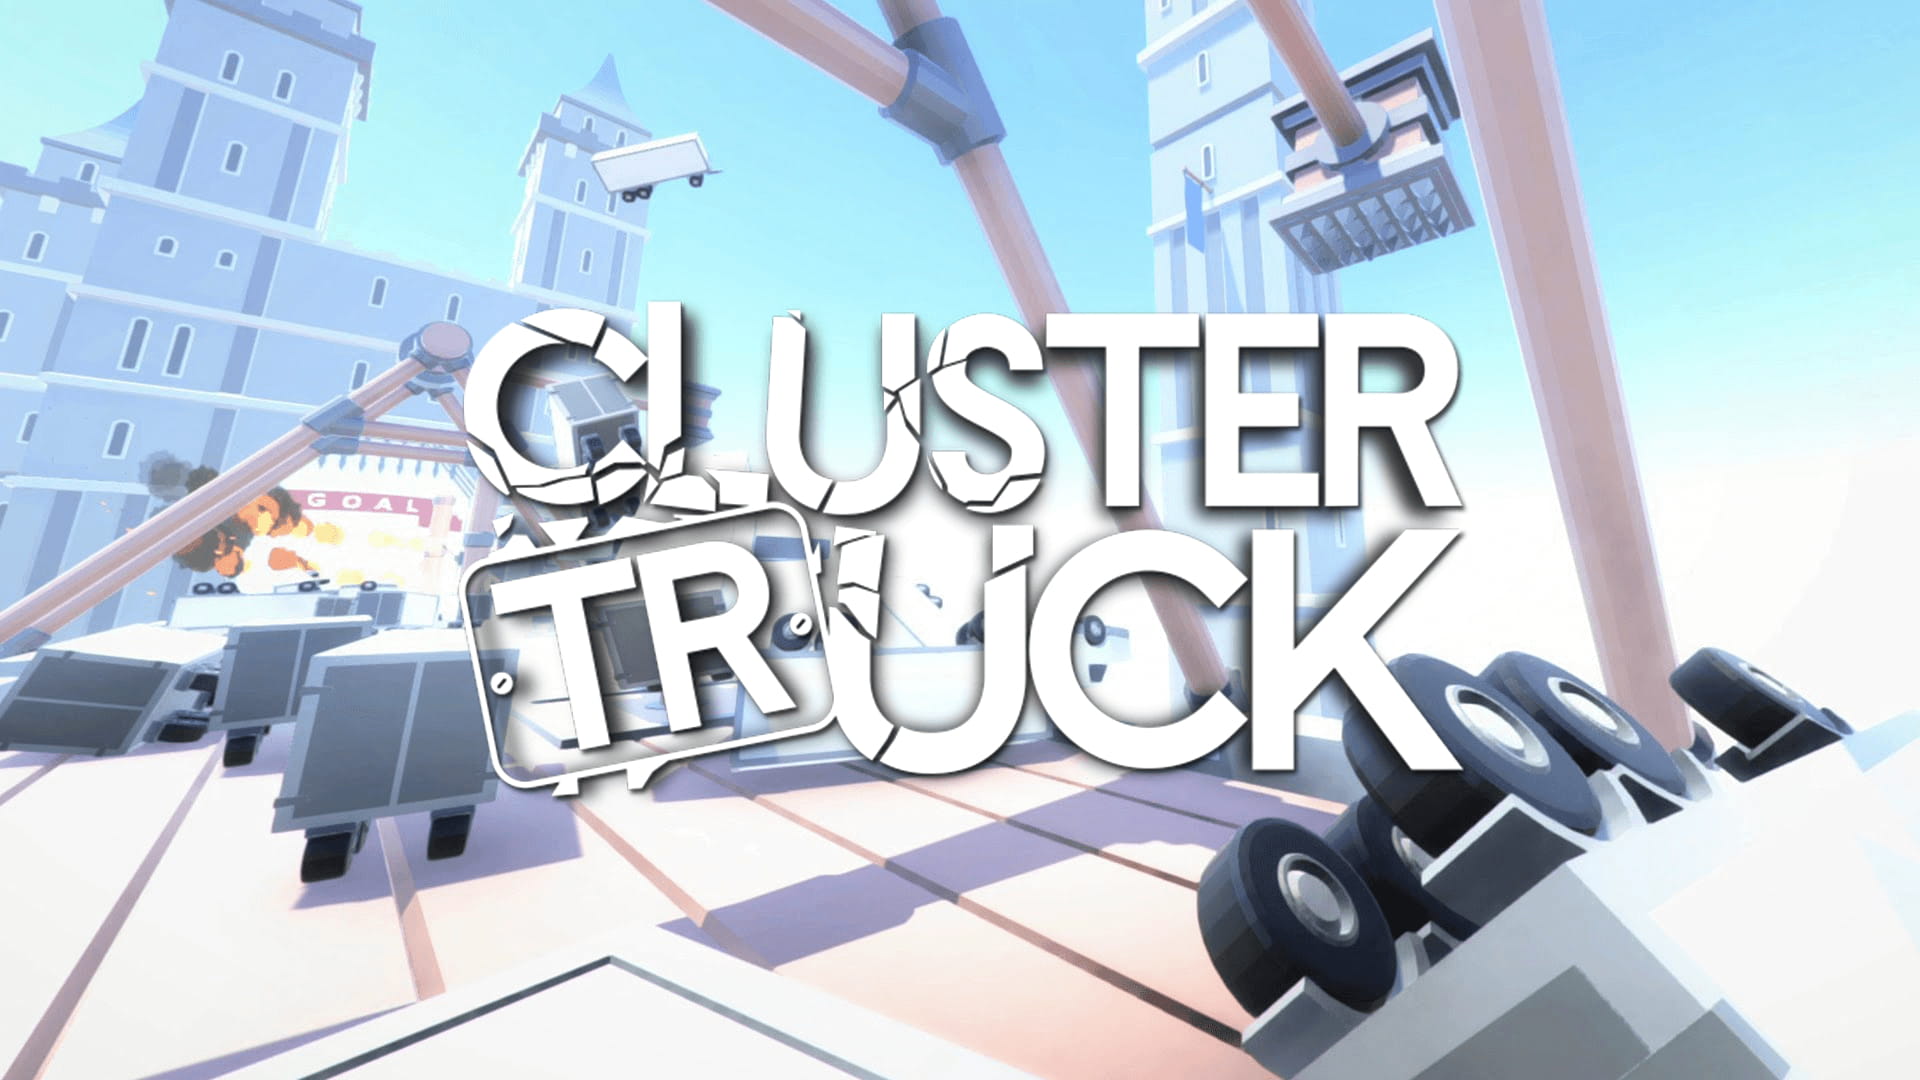 Cluster Trucks and Box Party